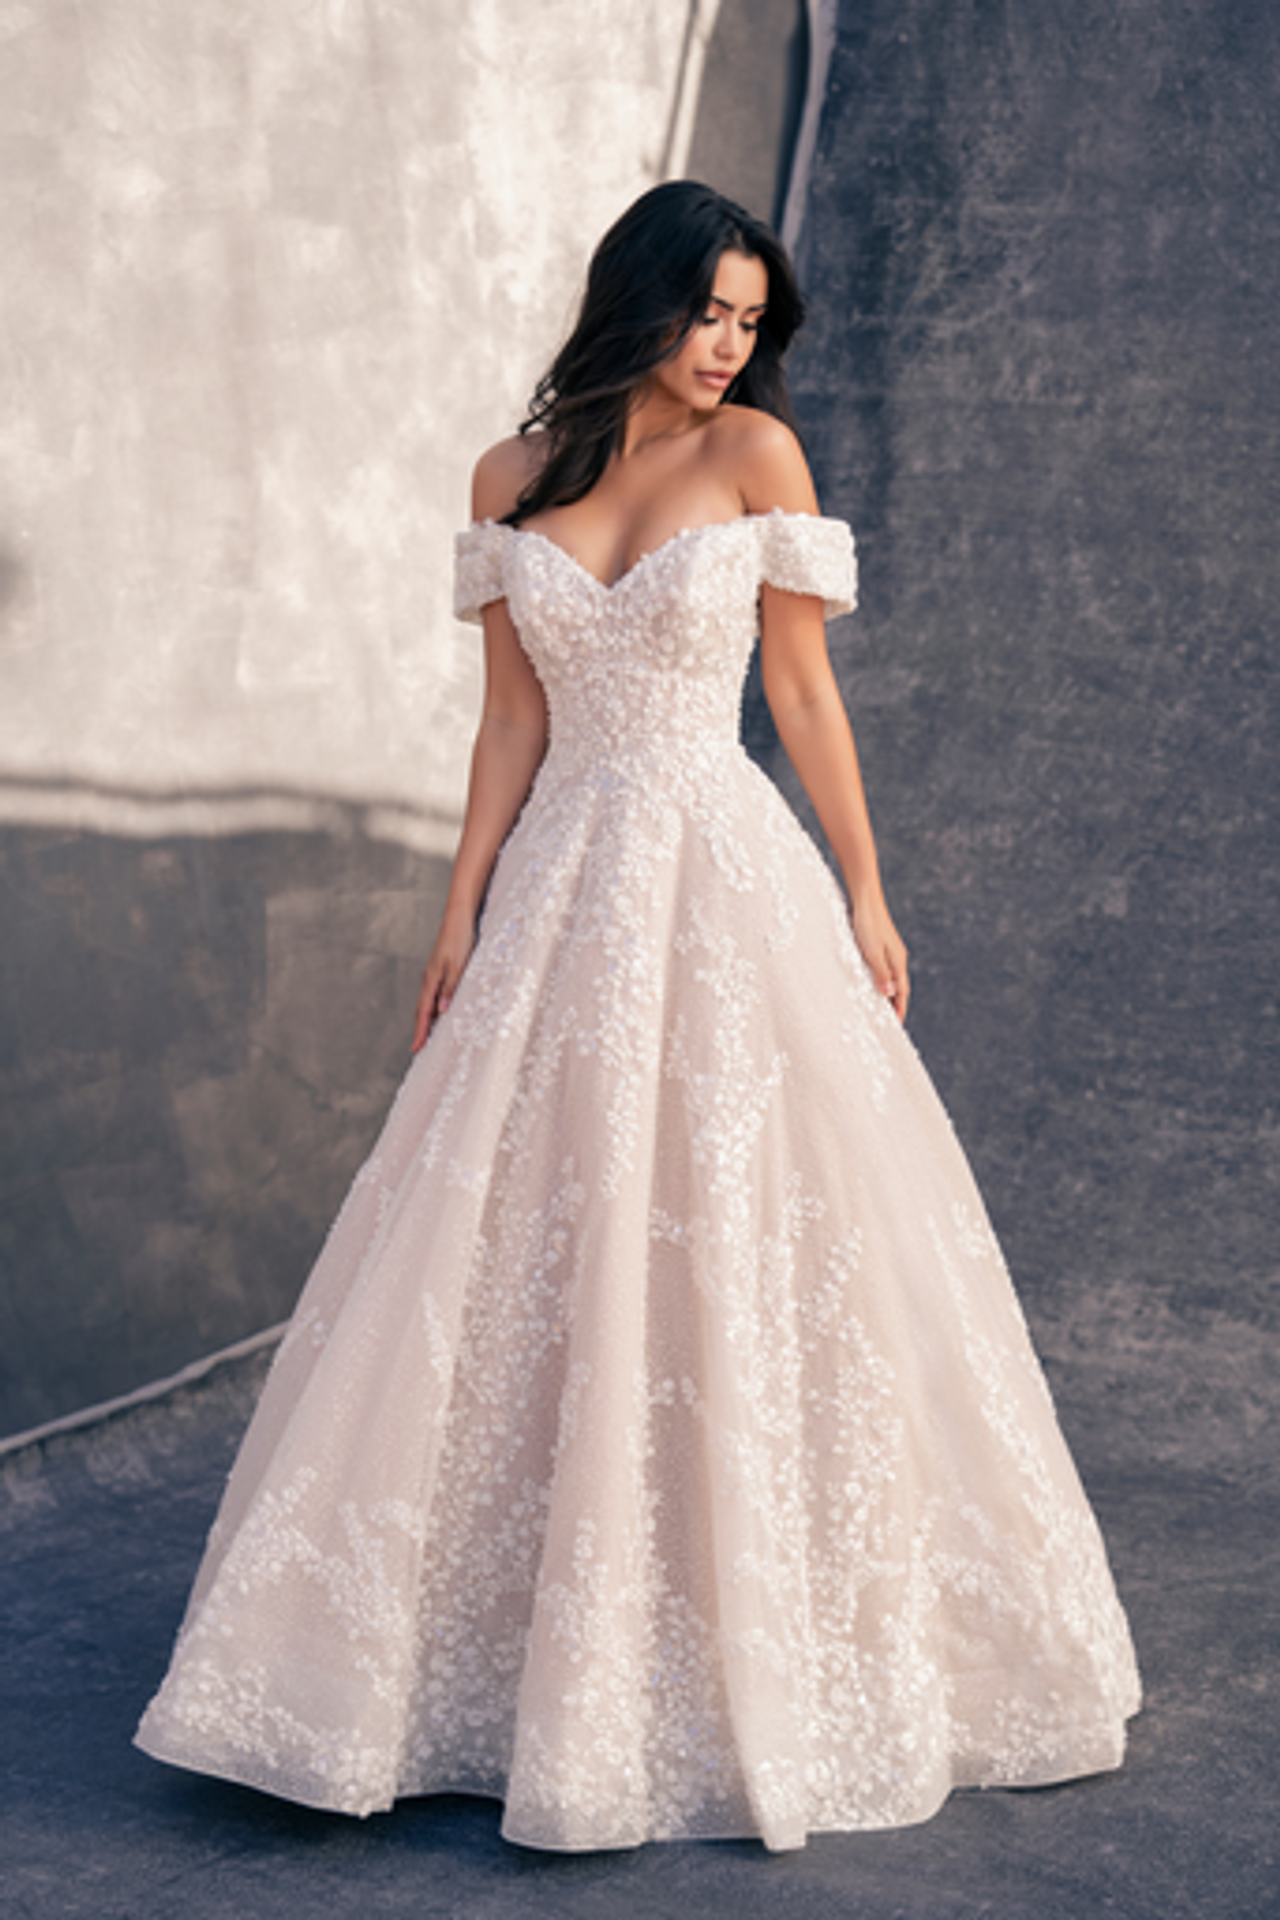 Tulle and Sheer Lace Ball Gown Wedding Dress | David's Bridal